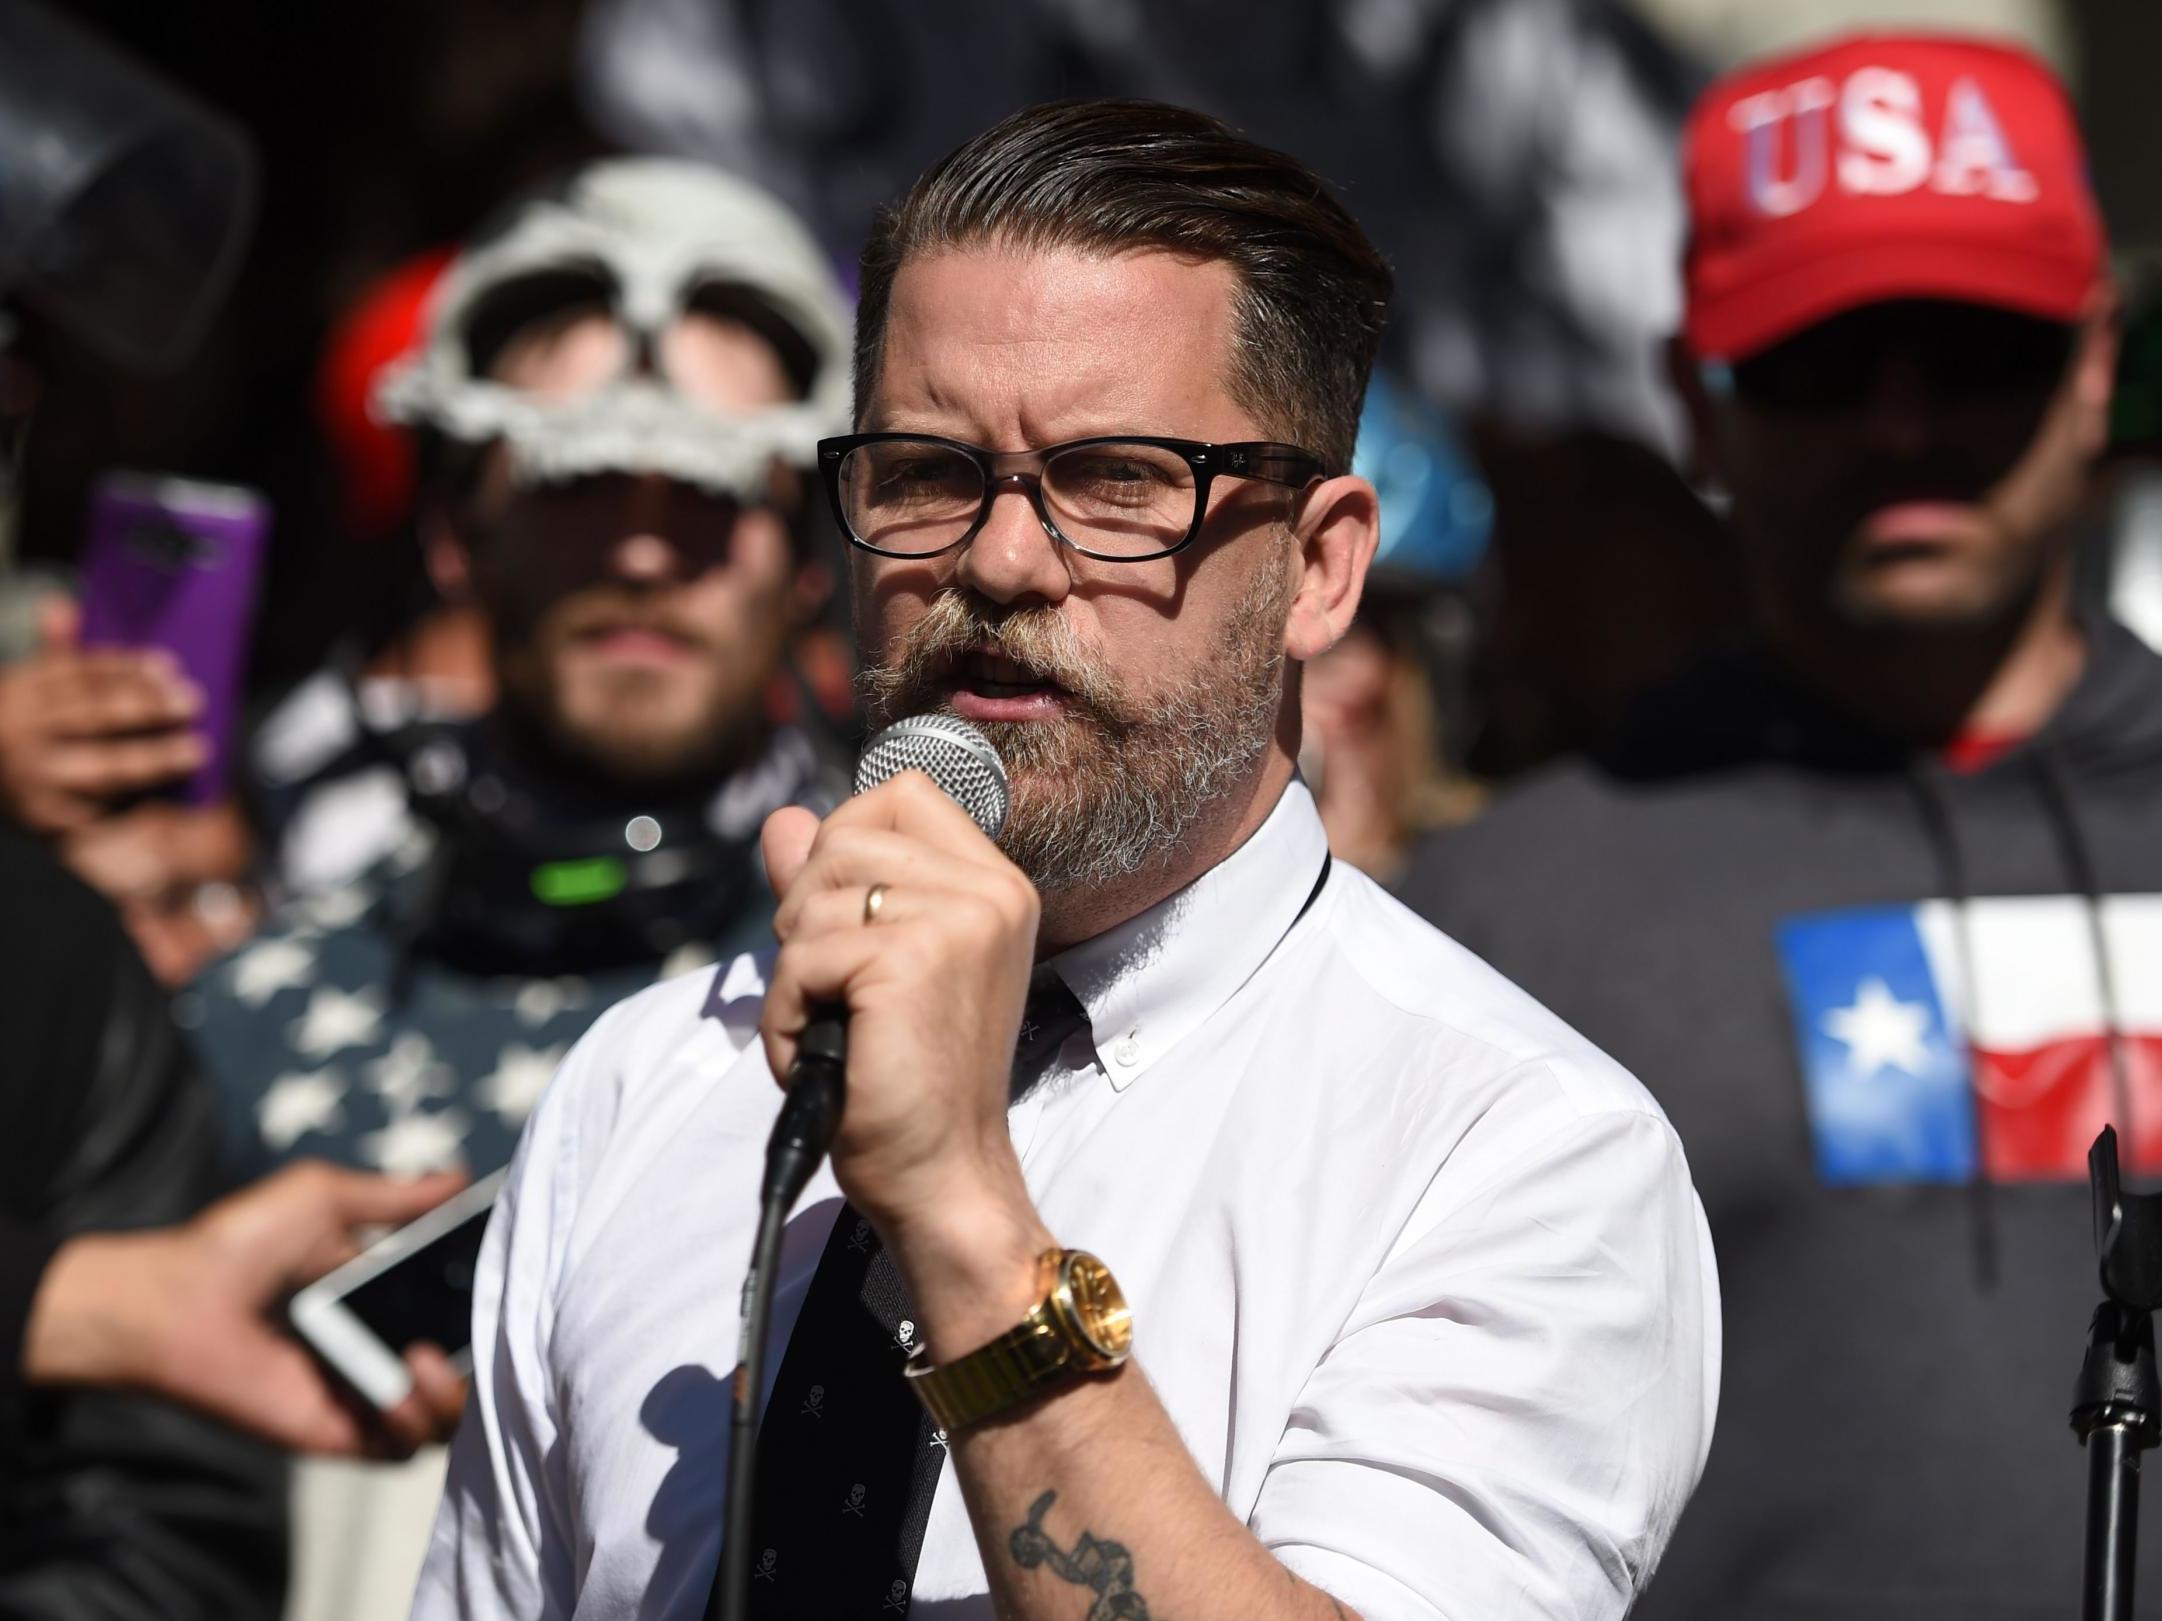 Gavin McInnes addresses a crowd during a conservative rally in Berkeley, California, last year (AFP/Getty)